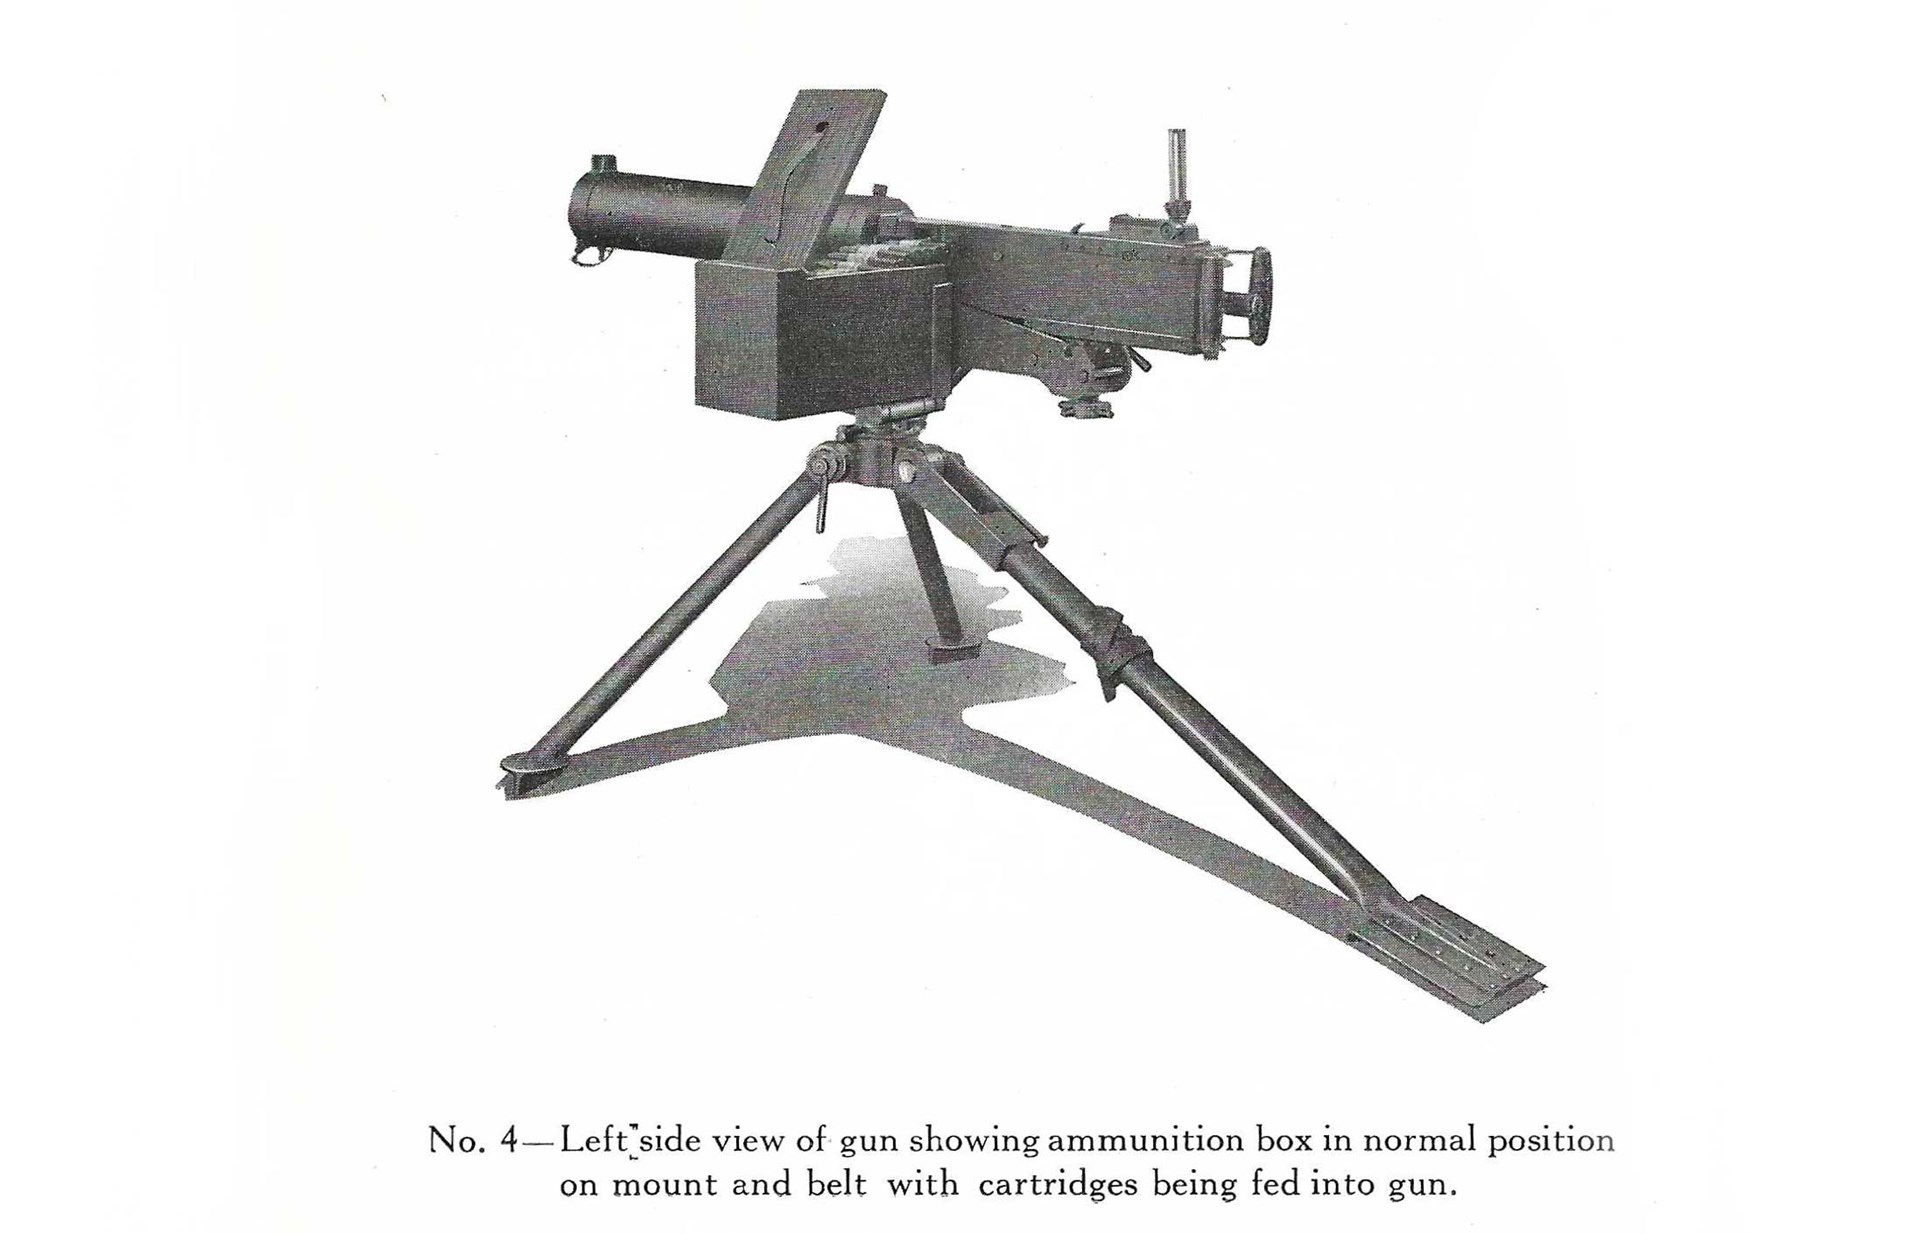 Showing the left side and rear of the Colt Model 1924 Automatic Machine Gun